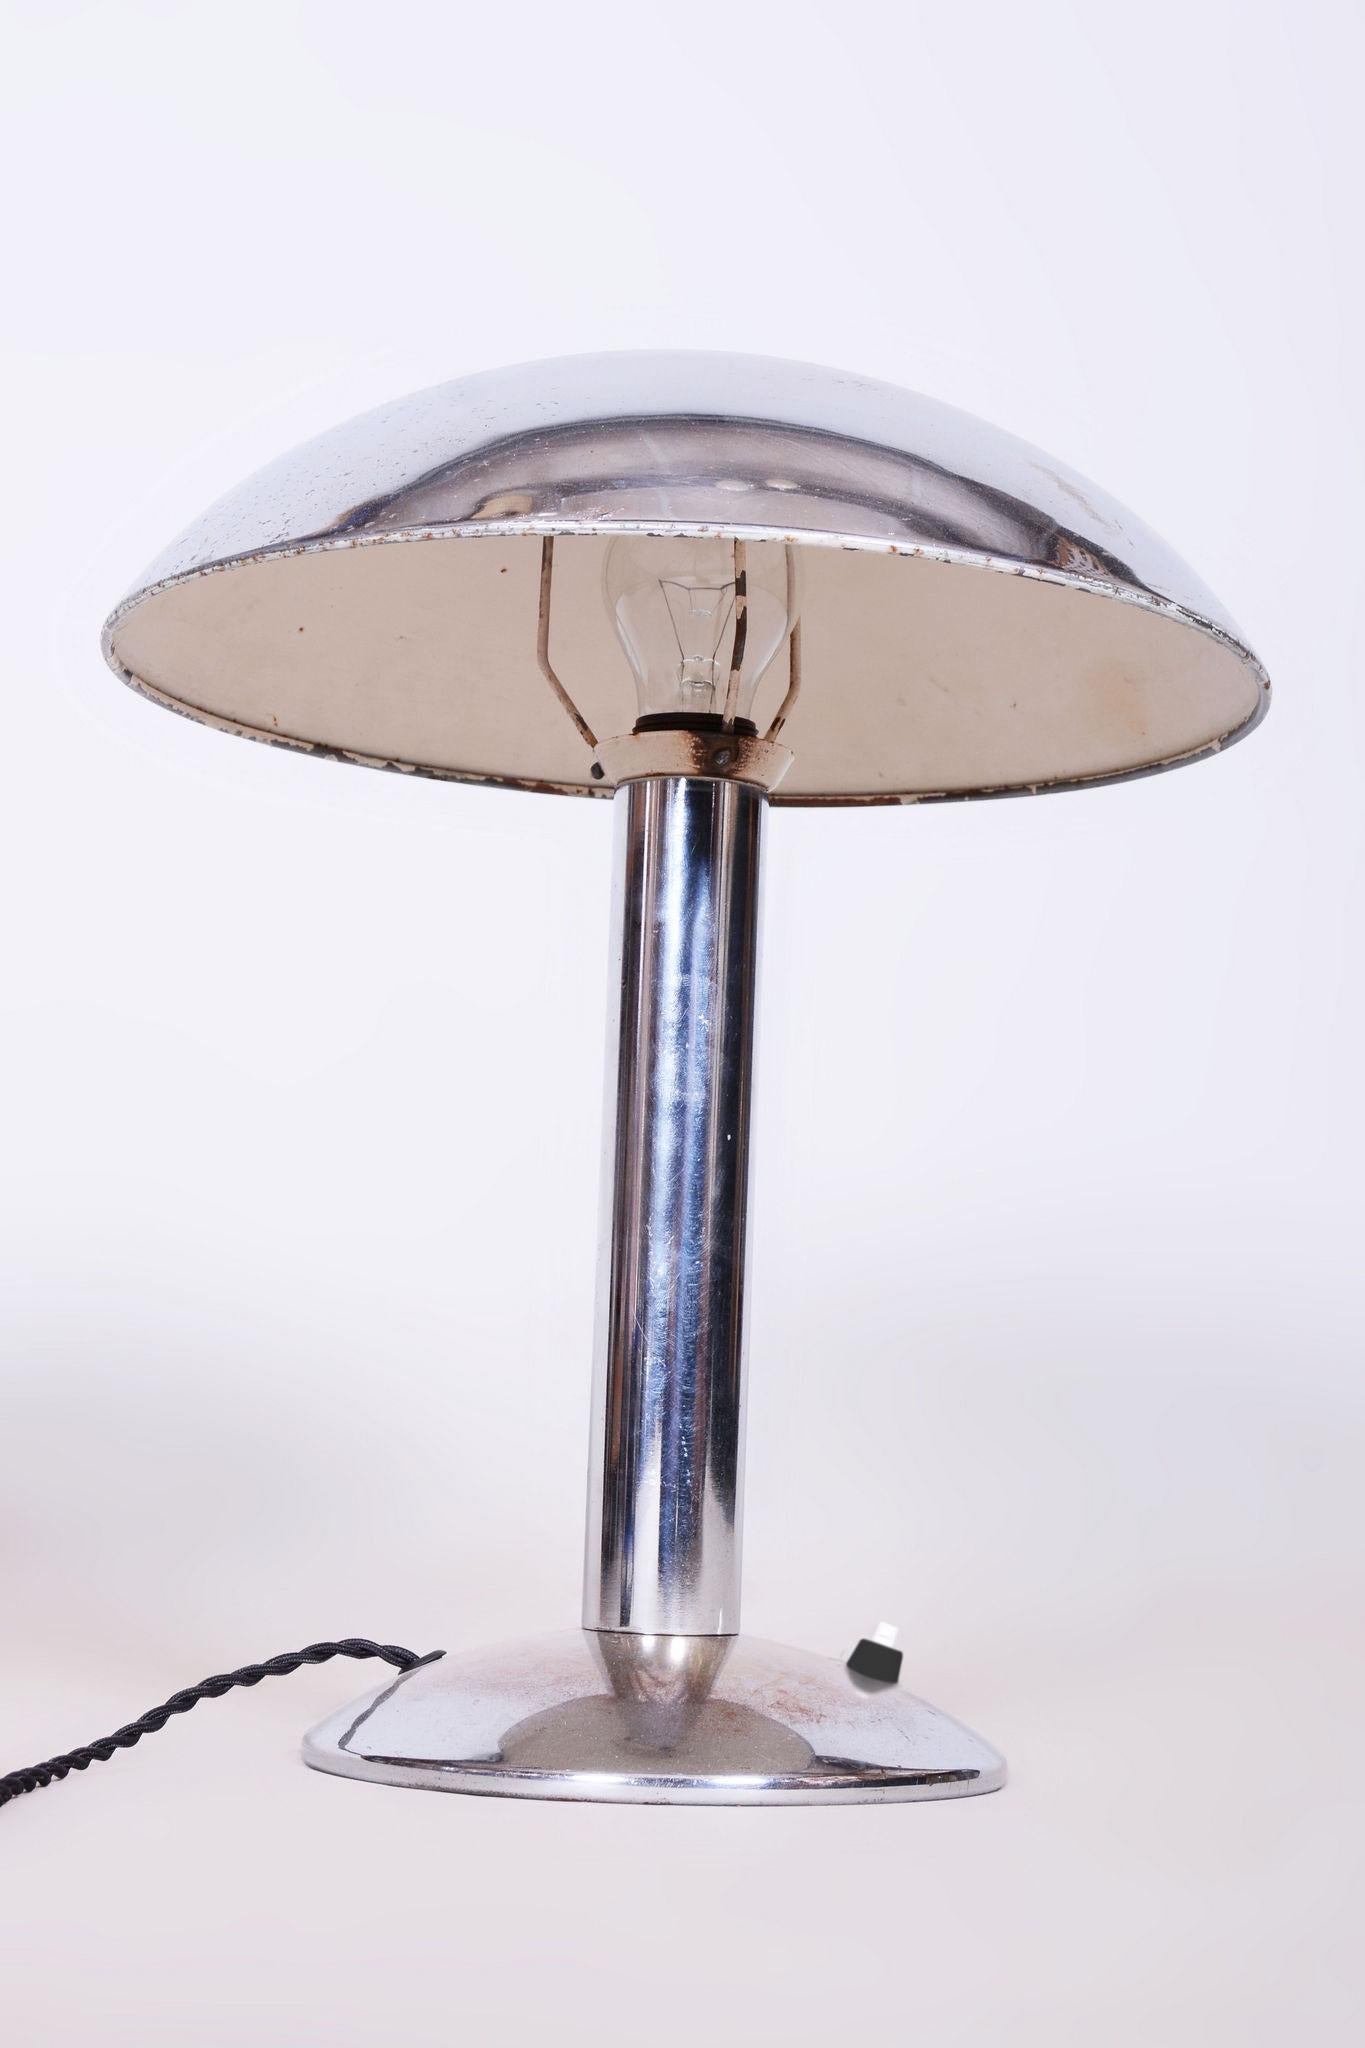 Mid-20th Century Restored Art Deco Table Lamp, by NAPAKO, New Electrification, Czech, 1930s For Sale